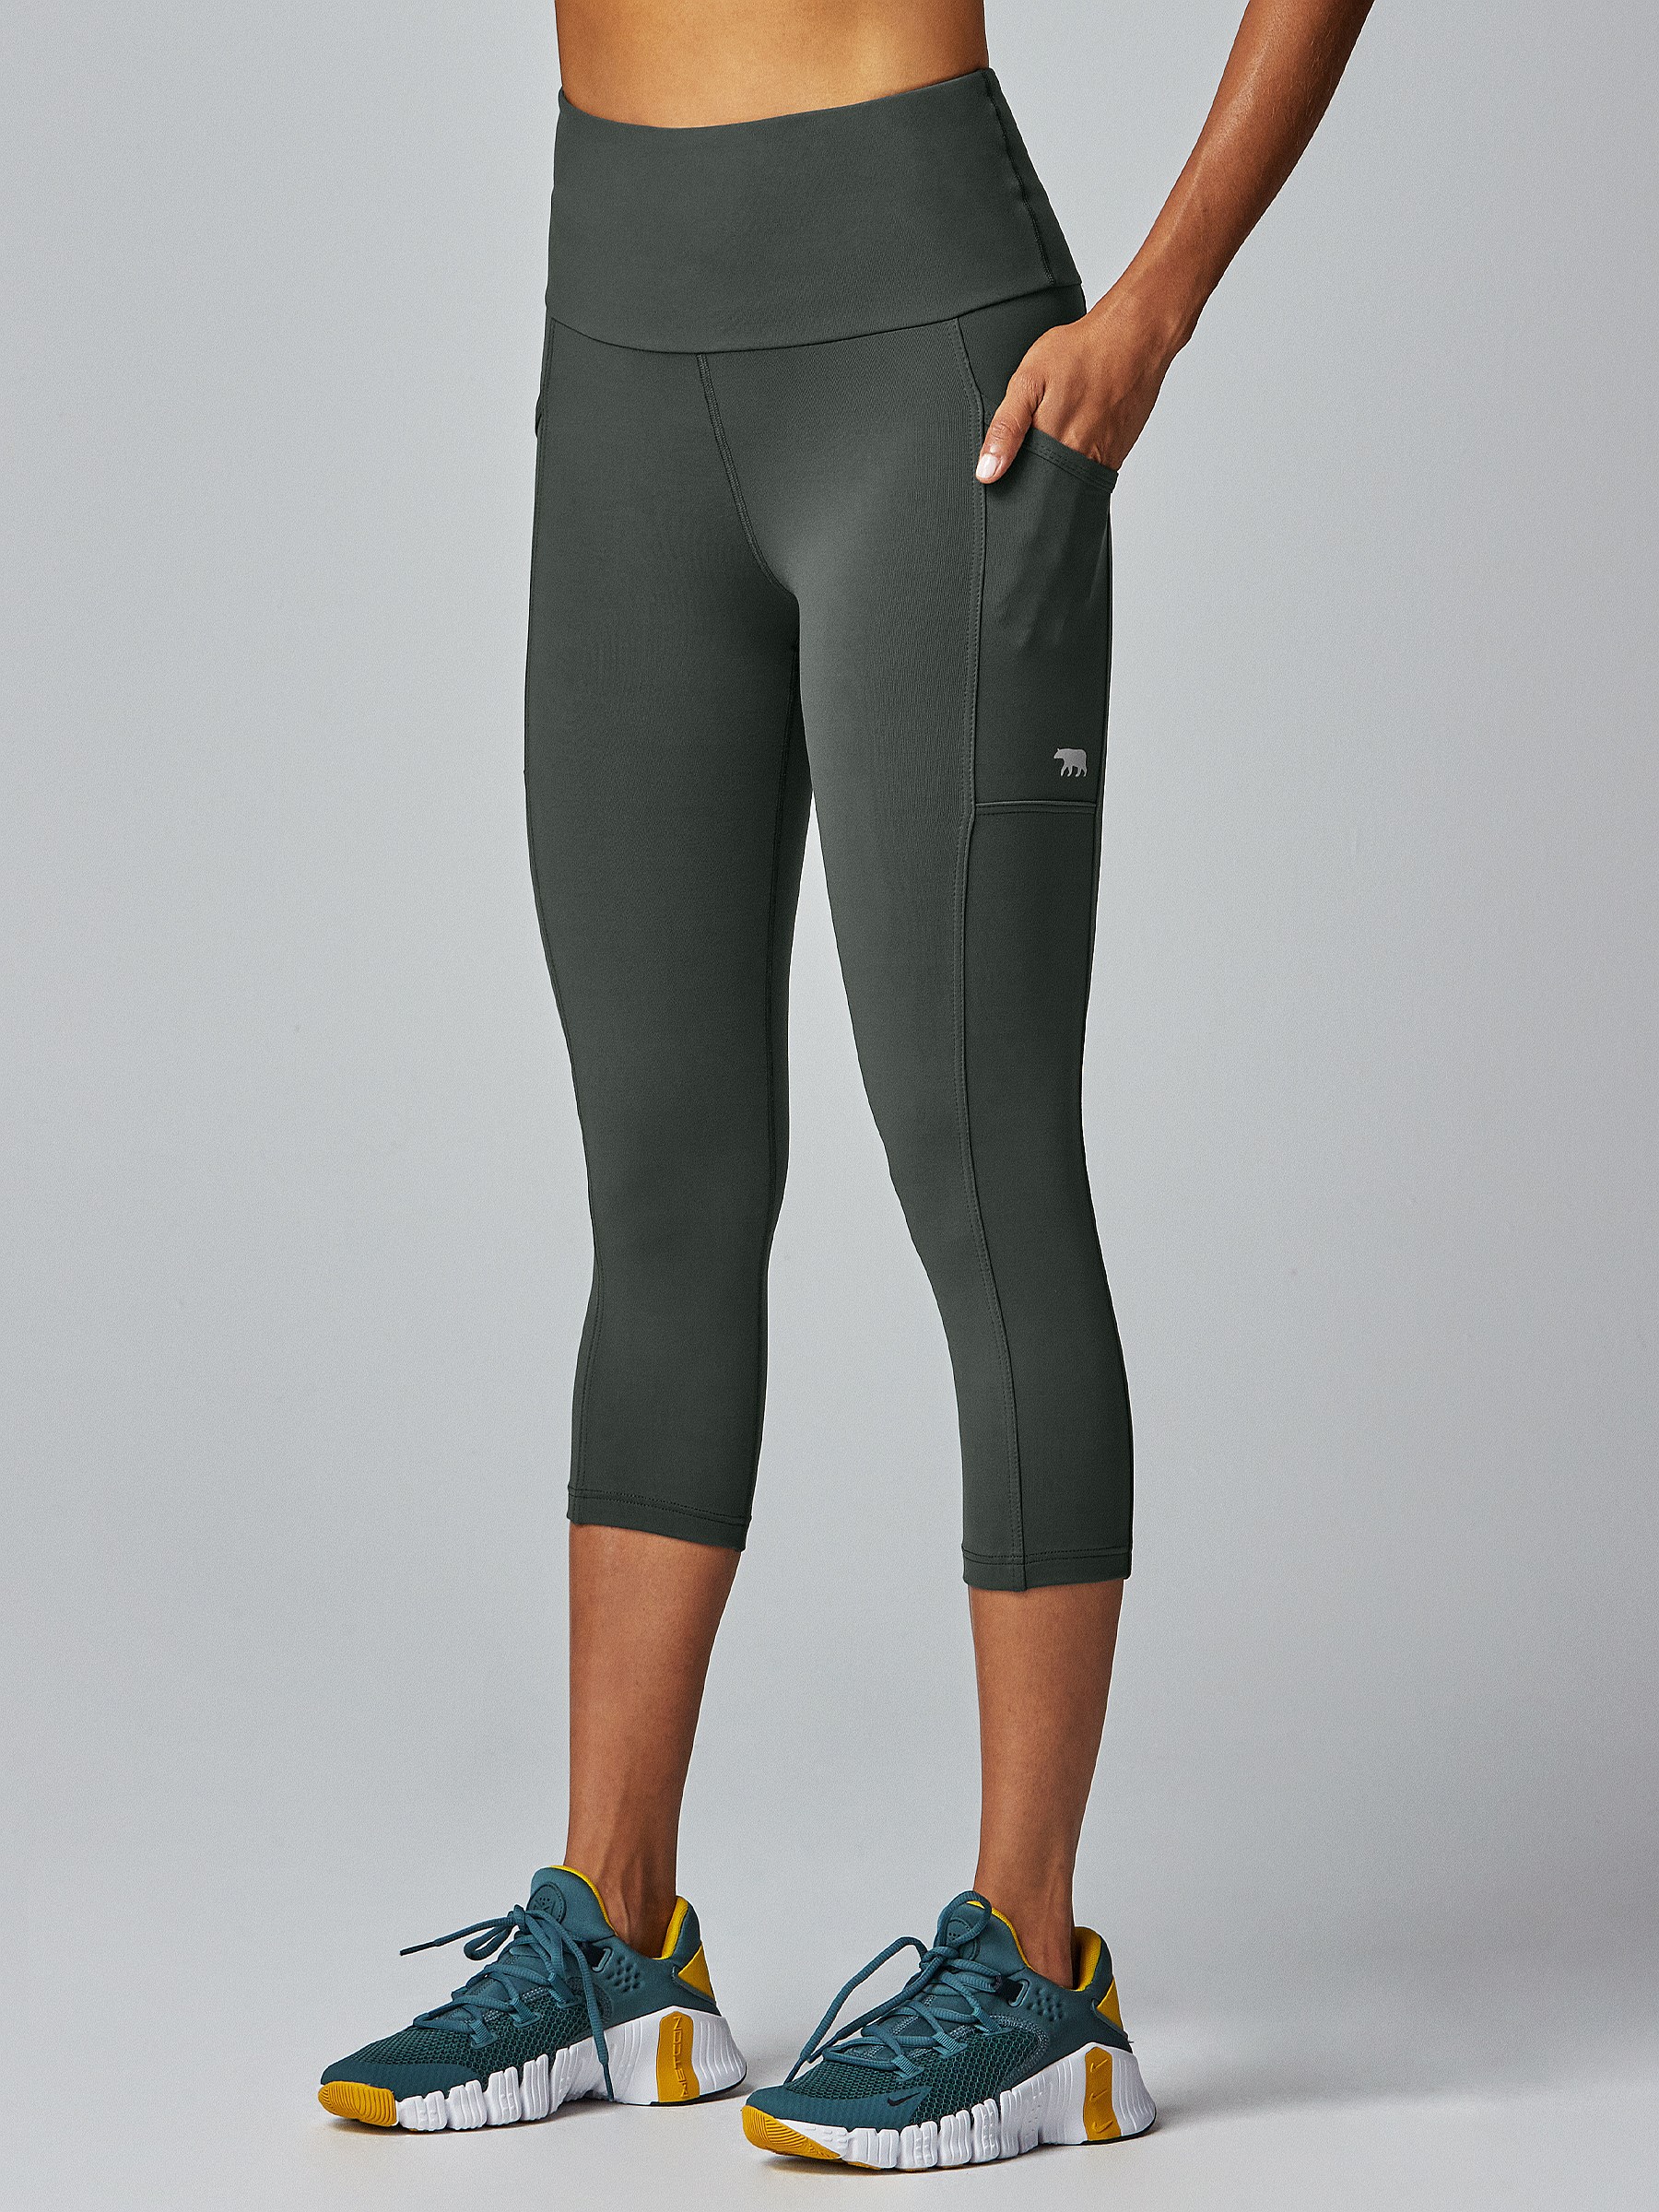 Womens 3/4 Pocket Tights. Leggings with Pockets by Running Bare.